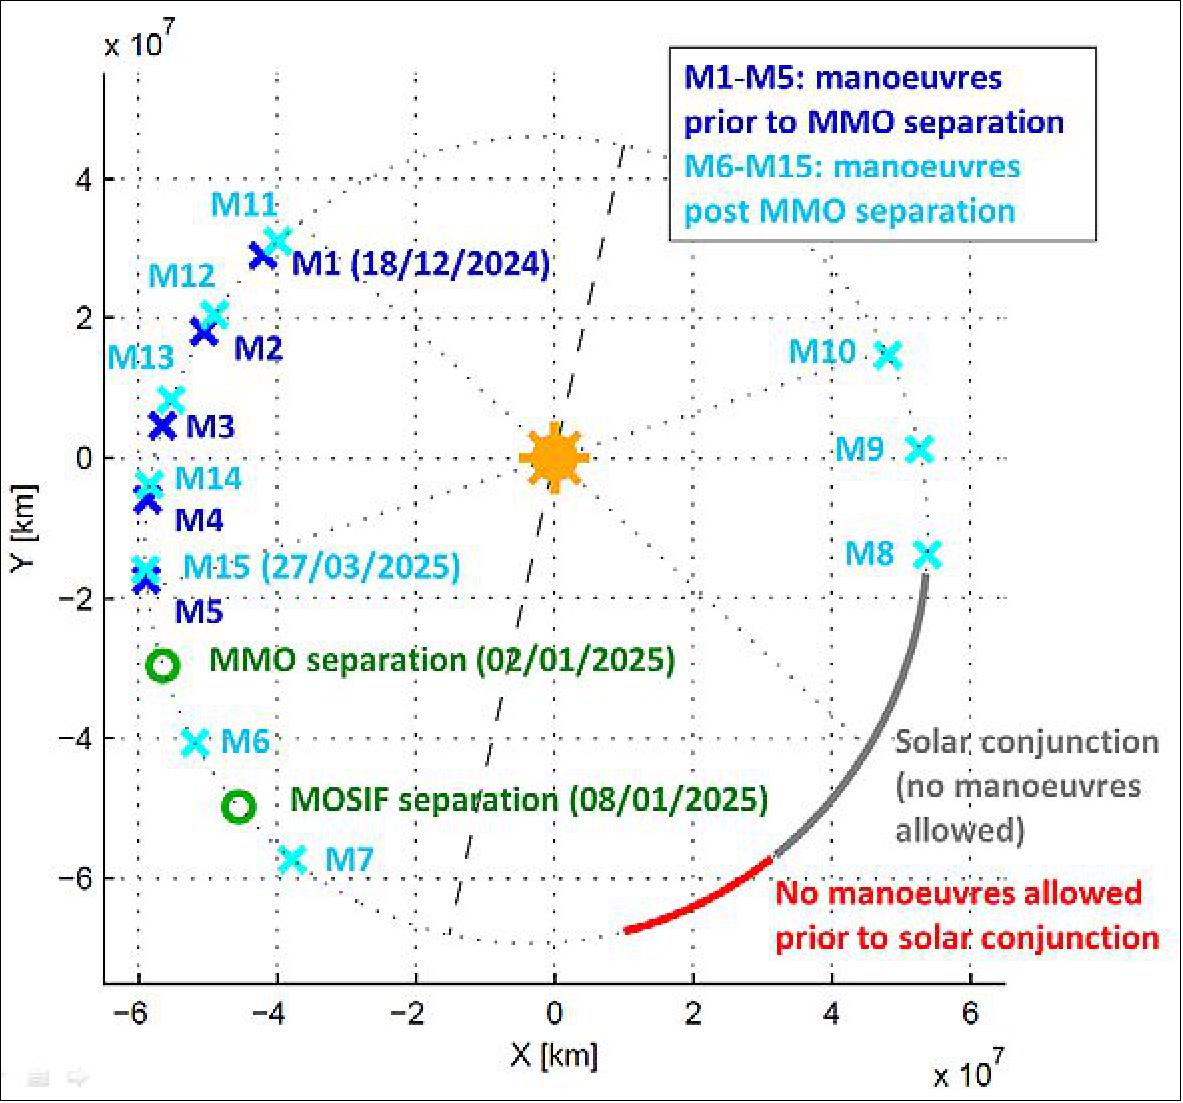 Figure 15: Schematic of the MOI sequence for launch in April 2018 (depicted in ecliptic J2000 frame), image credit: ESA